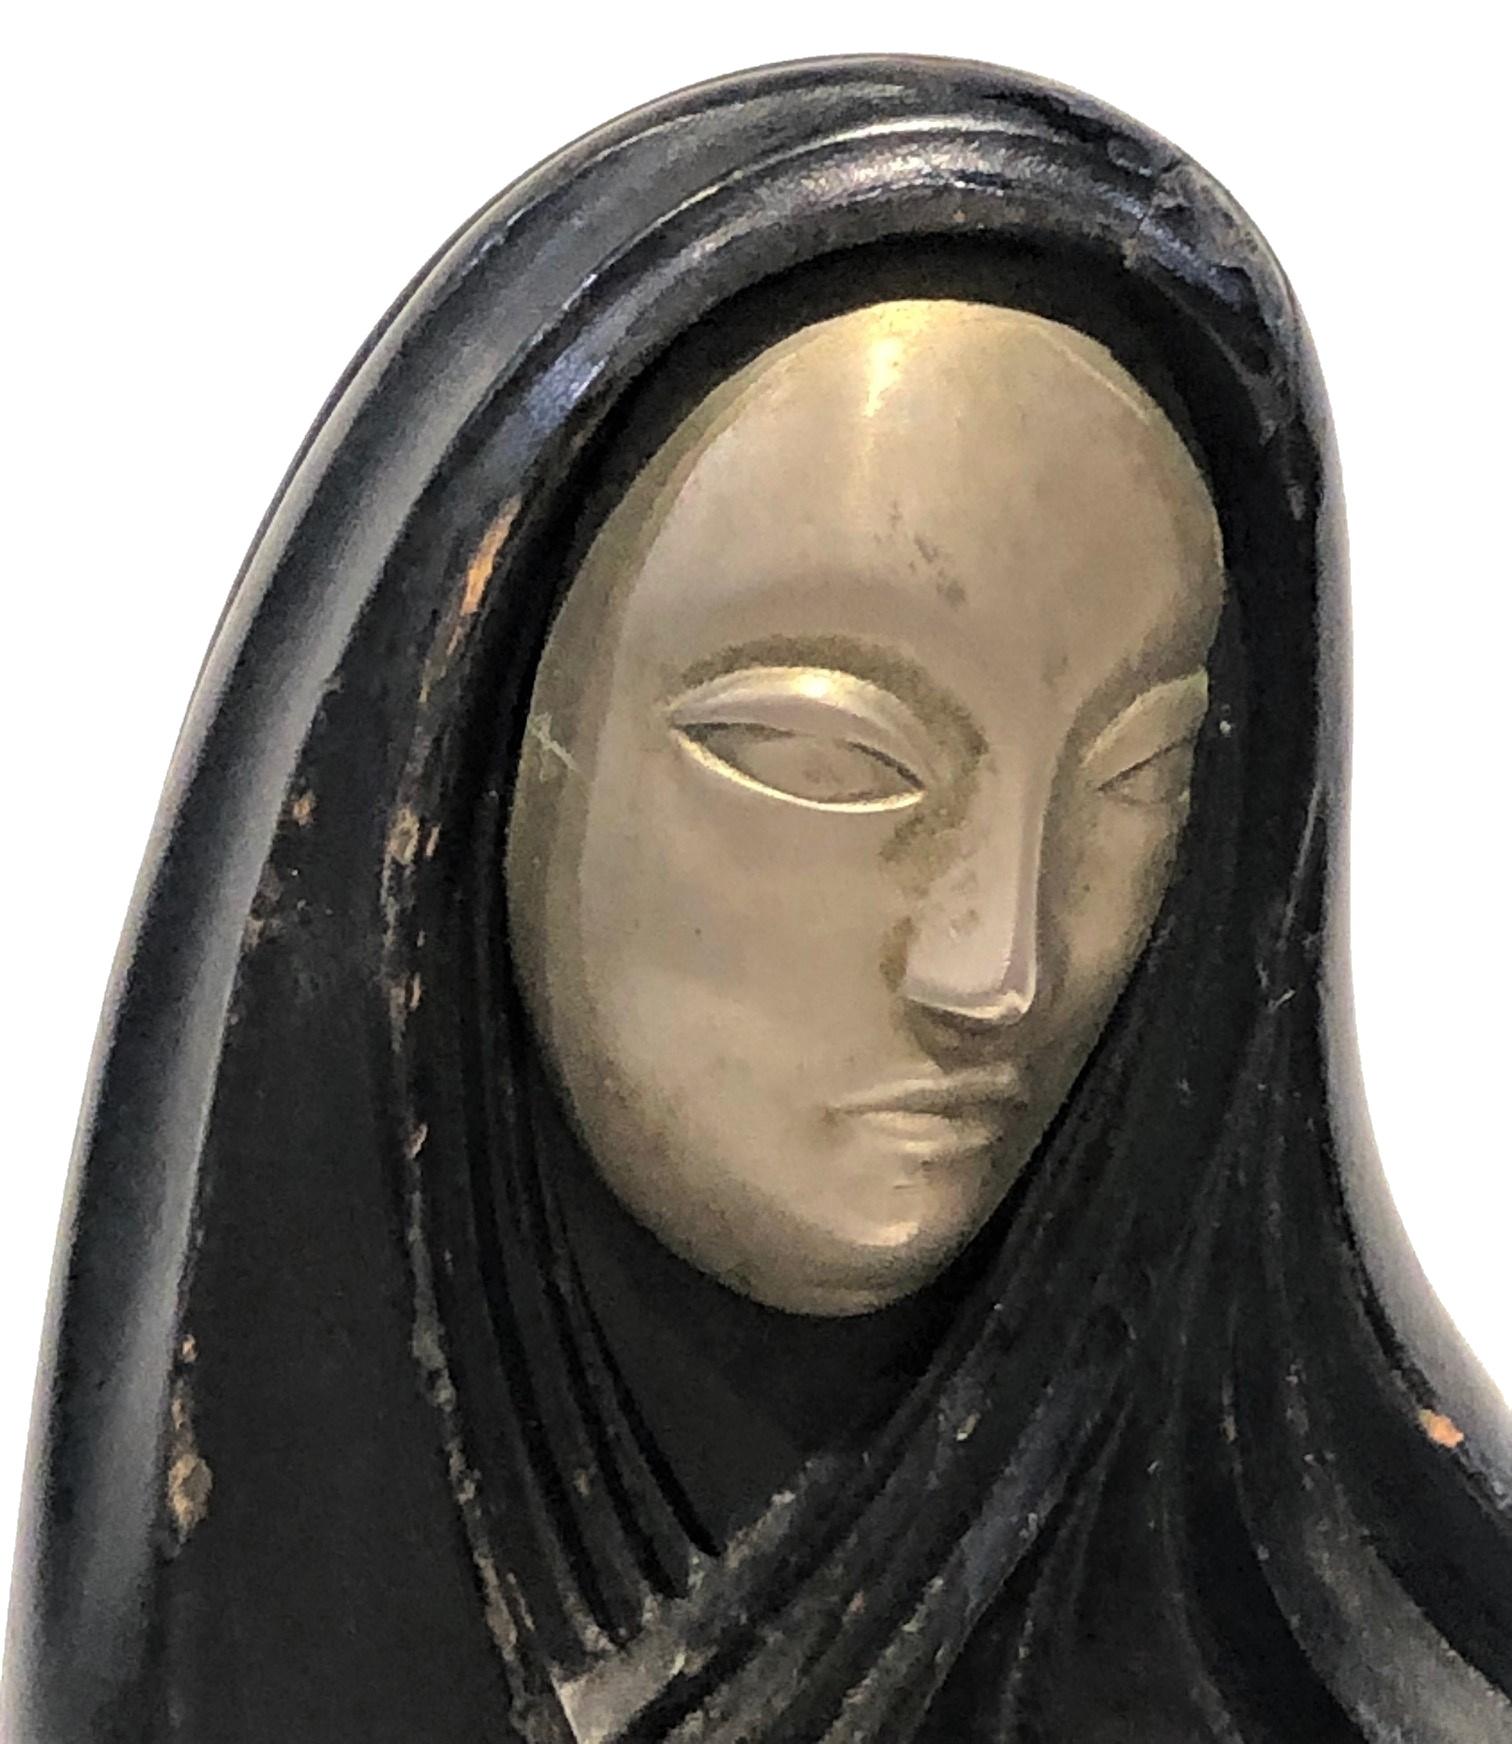 Austrian Art Deco 
(for Rena Rosenthal  possibly, by Hagenauer)
Madonna and Child
Carved Ebonized Wood & Silvered Metal 
ca. 1920’s

MATERIALS
Ebonized wood and silvered metal.

MARKINGS
Stamped with “Made in Austria” and 